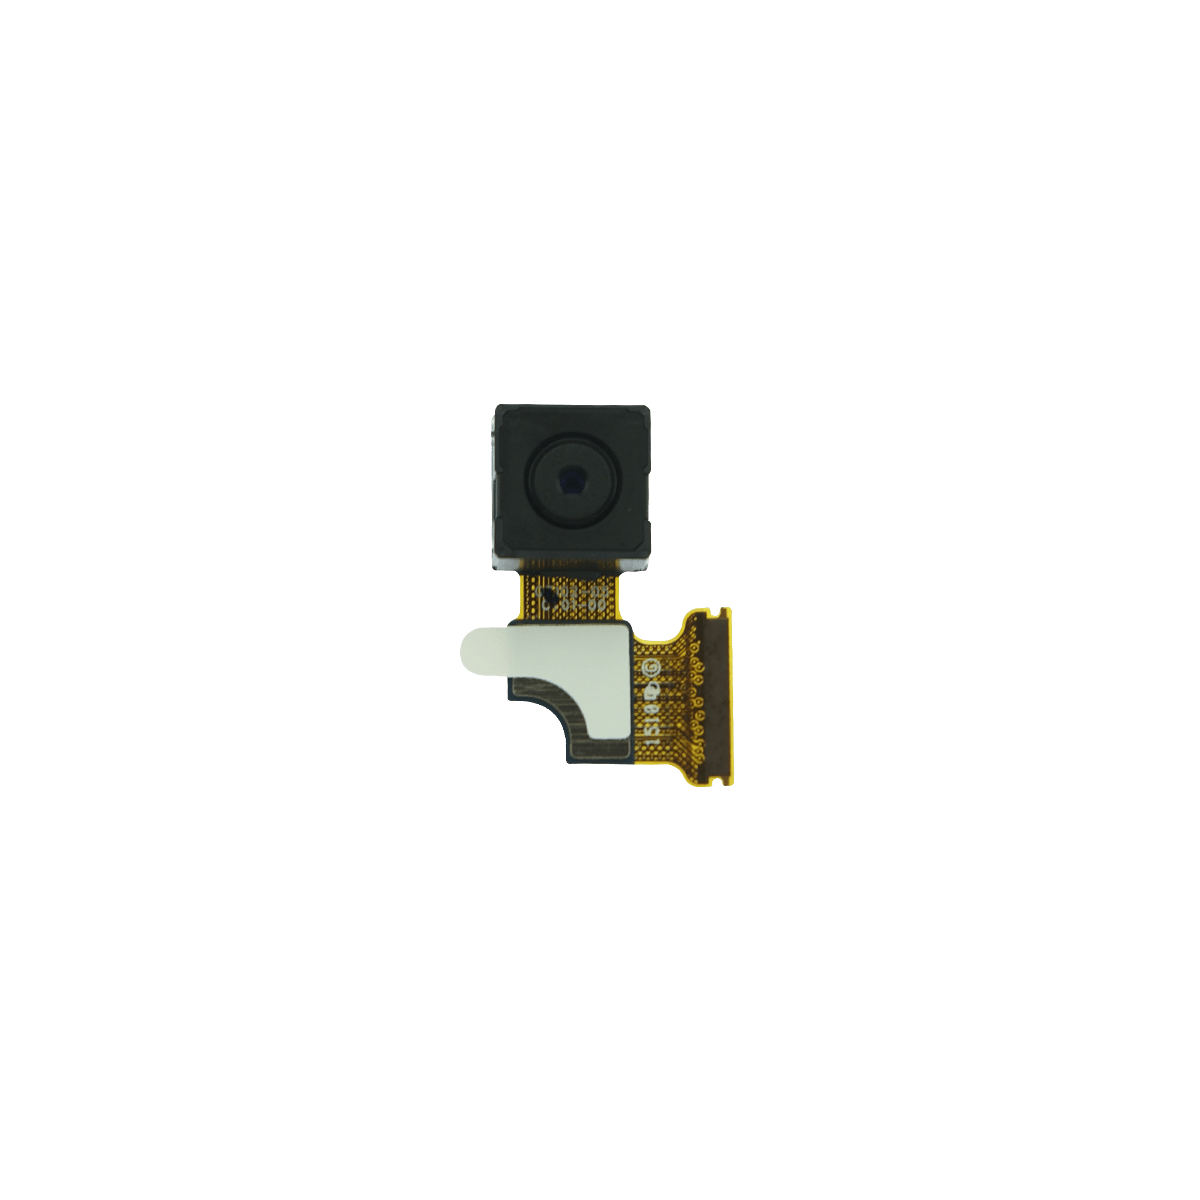 Samsung Galaxy Grand 2 G7102 G7105 Rear Camera Replacement